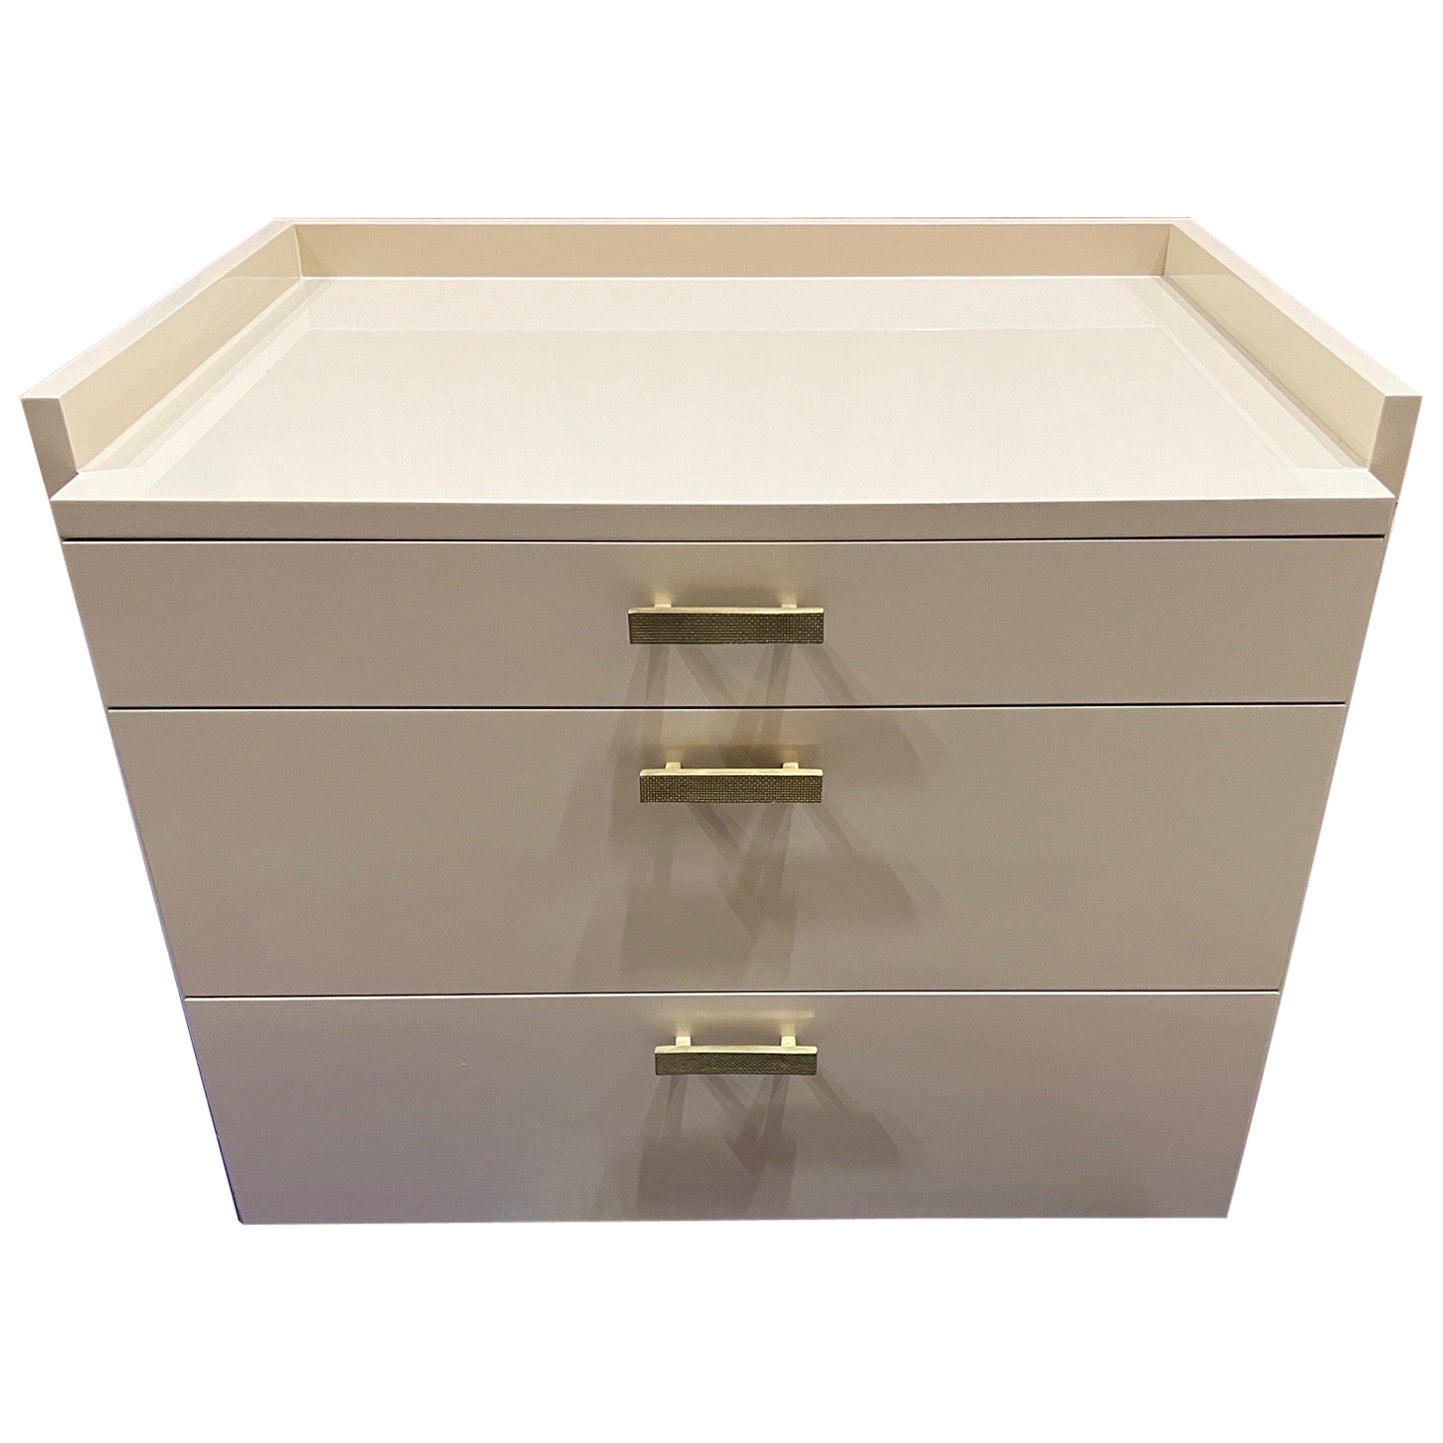 Pair of Custom Fabricated Cream Lacquered Bedside Tables